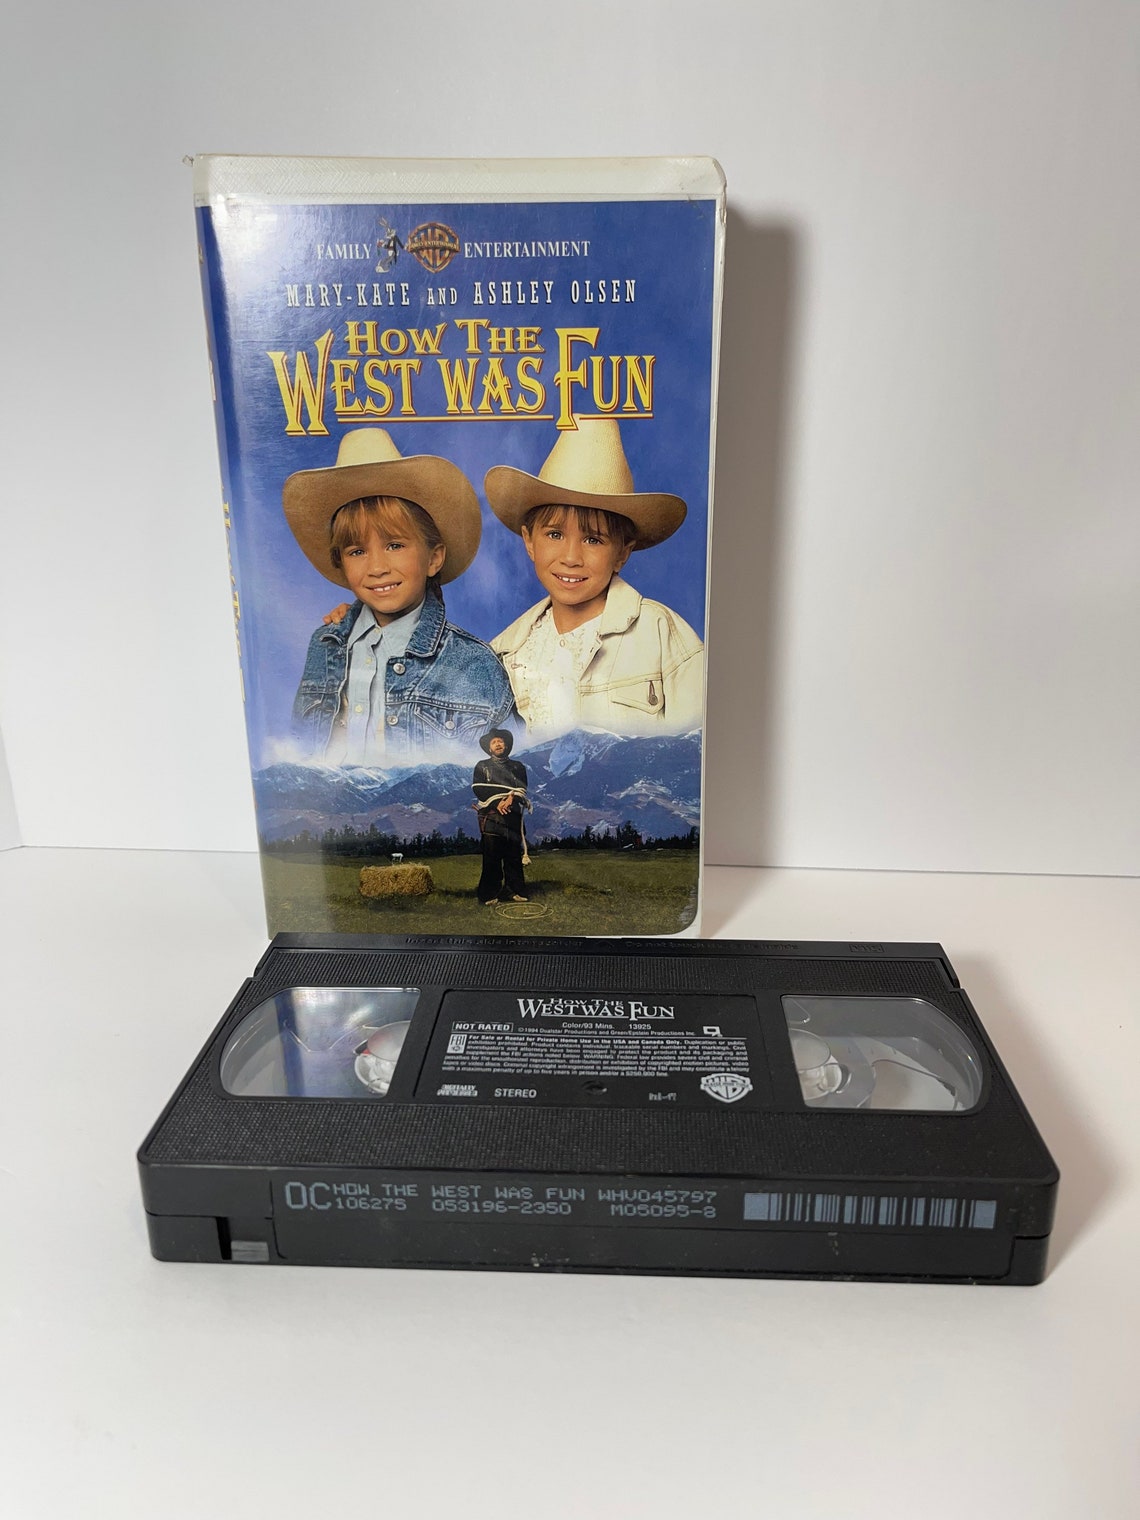 Mary-Kate and Ashley Olsen in How the West Was Fun on VHS. | Etsy